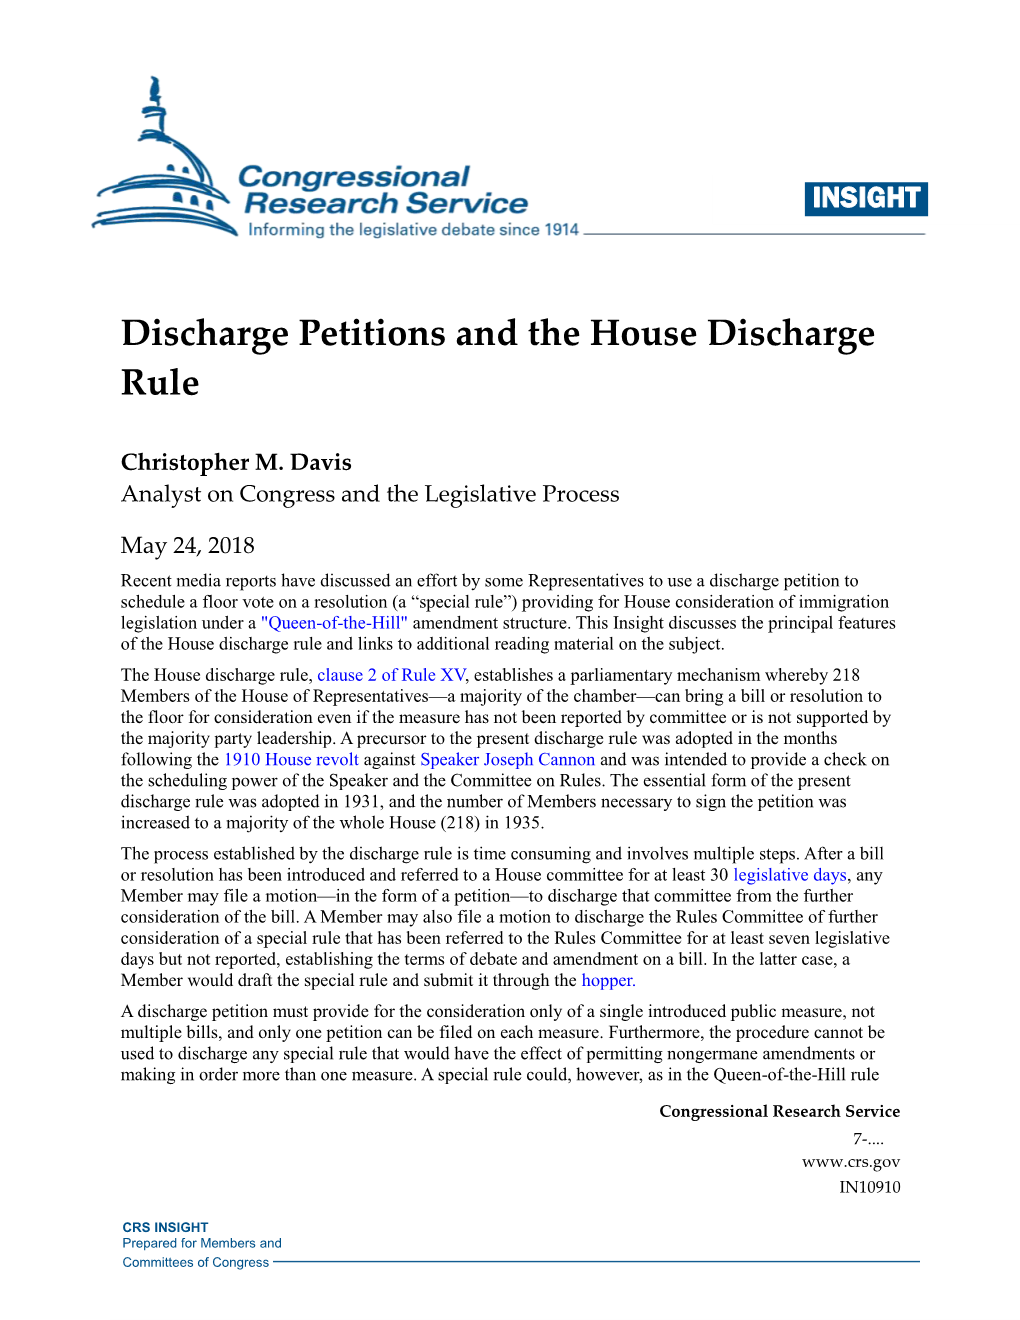 Discharge Petitions and the House Discharge Rule